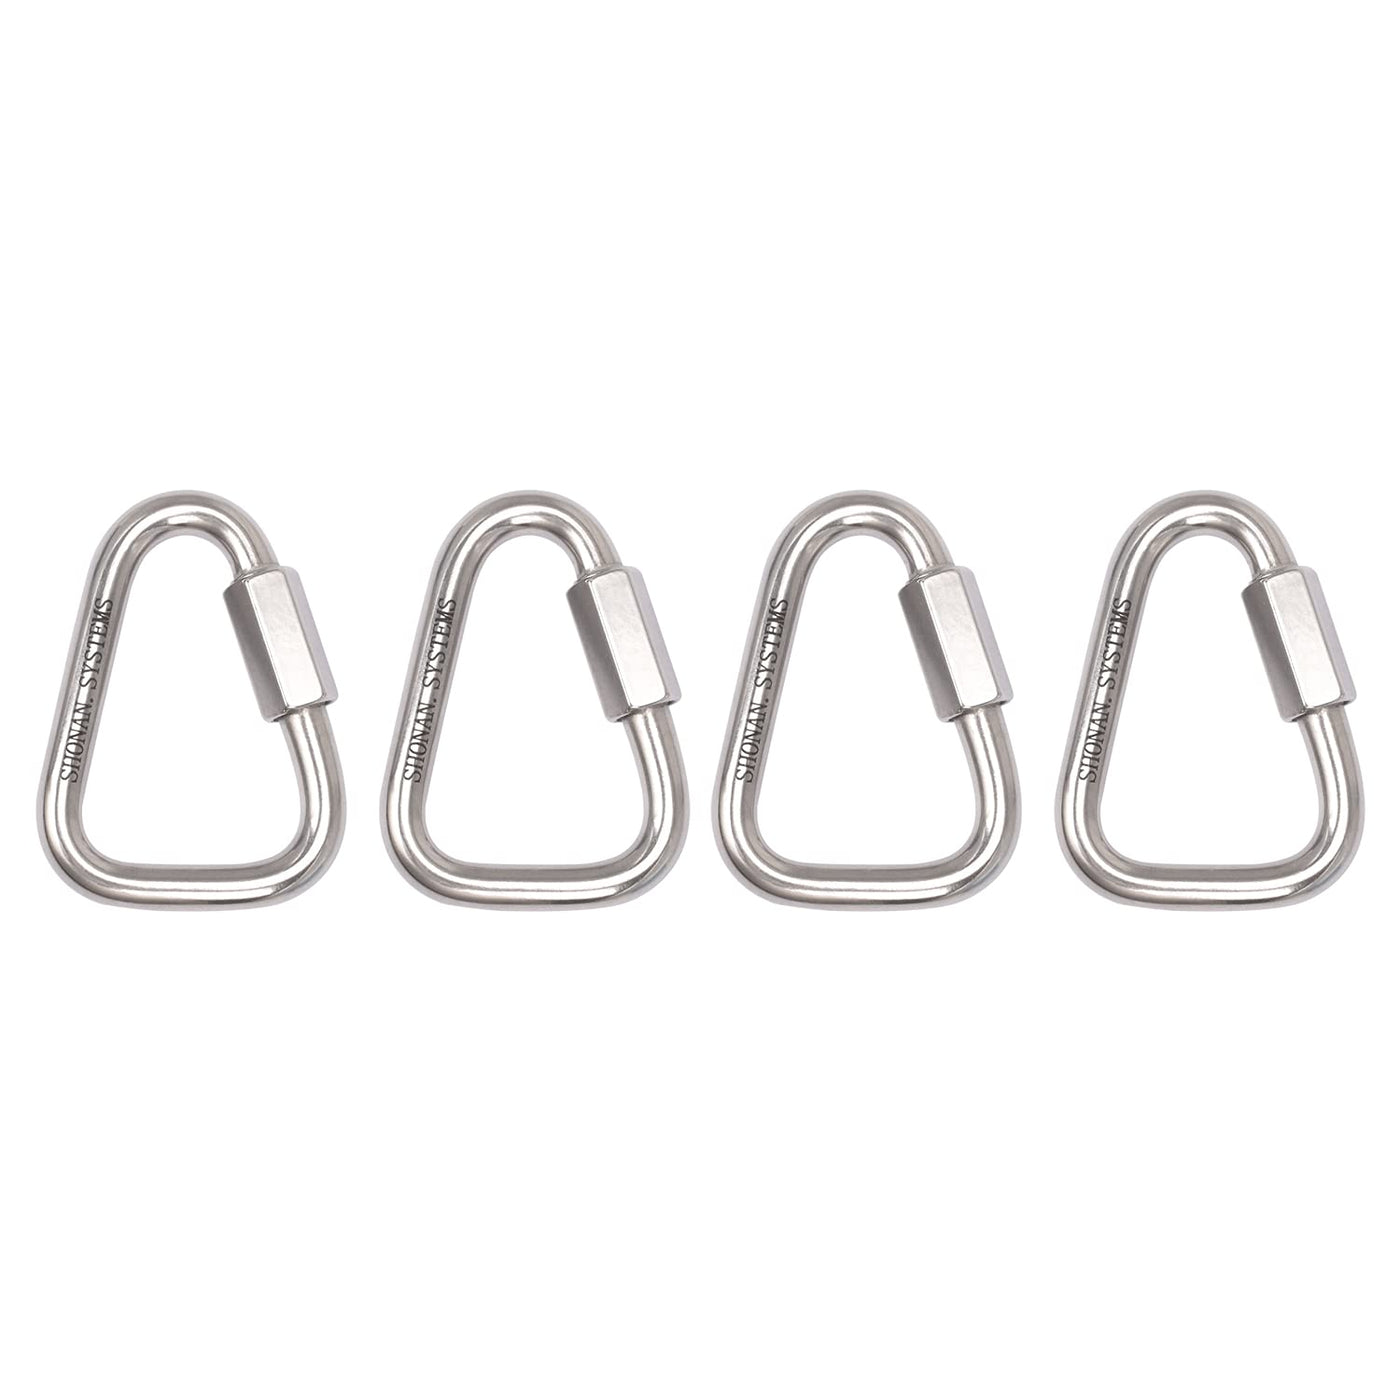 SHONAN Delta Quick Link 2.2 Inch Triangle Quick Links Stainless Steel  Triangle Carabiners Marine Grade, 4 Pack, 880 Lbs Capacity 2.2 Inch, 4  Pack(Marine Grade)